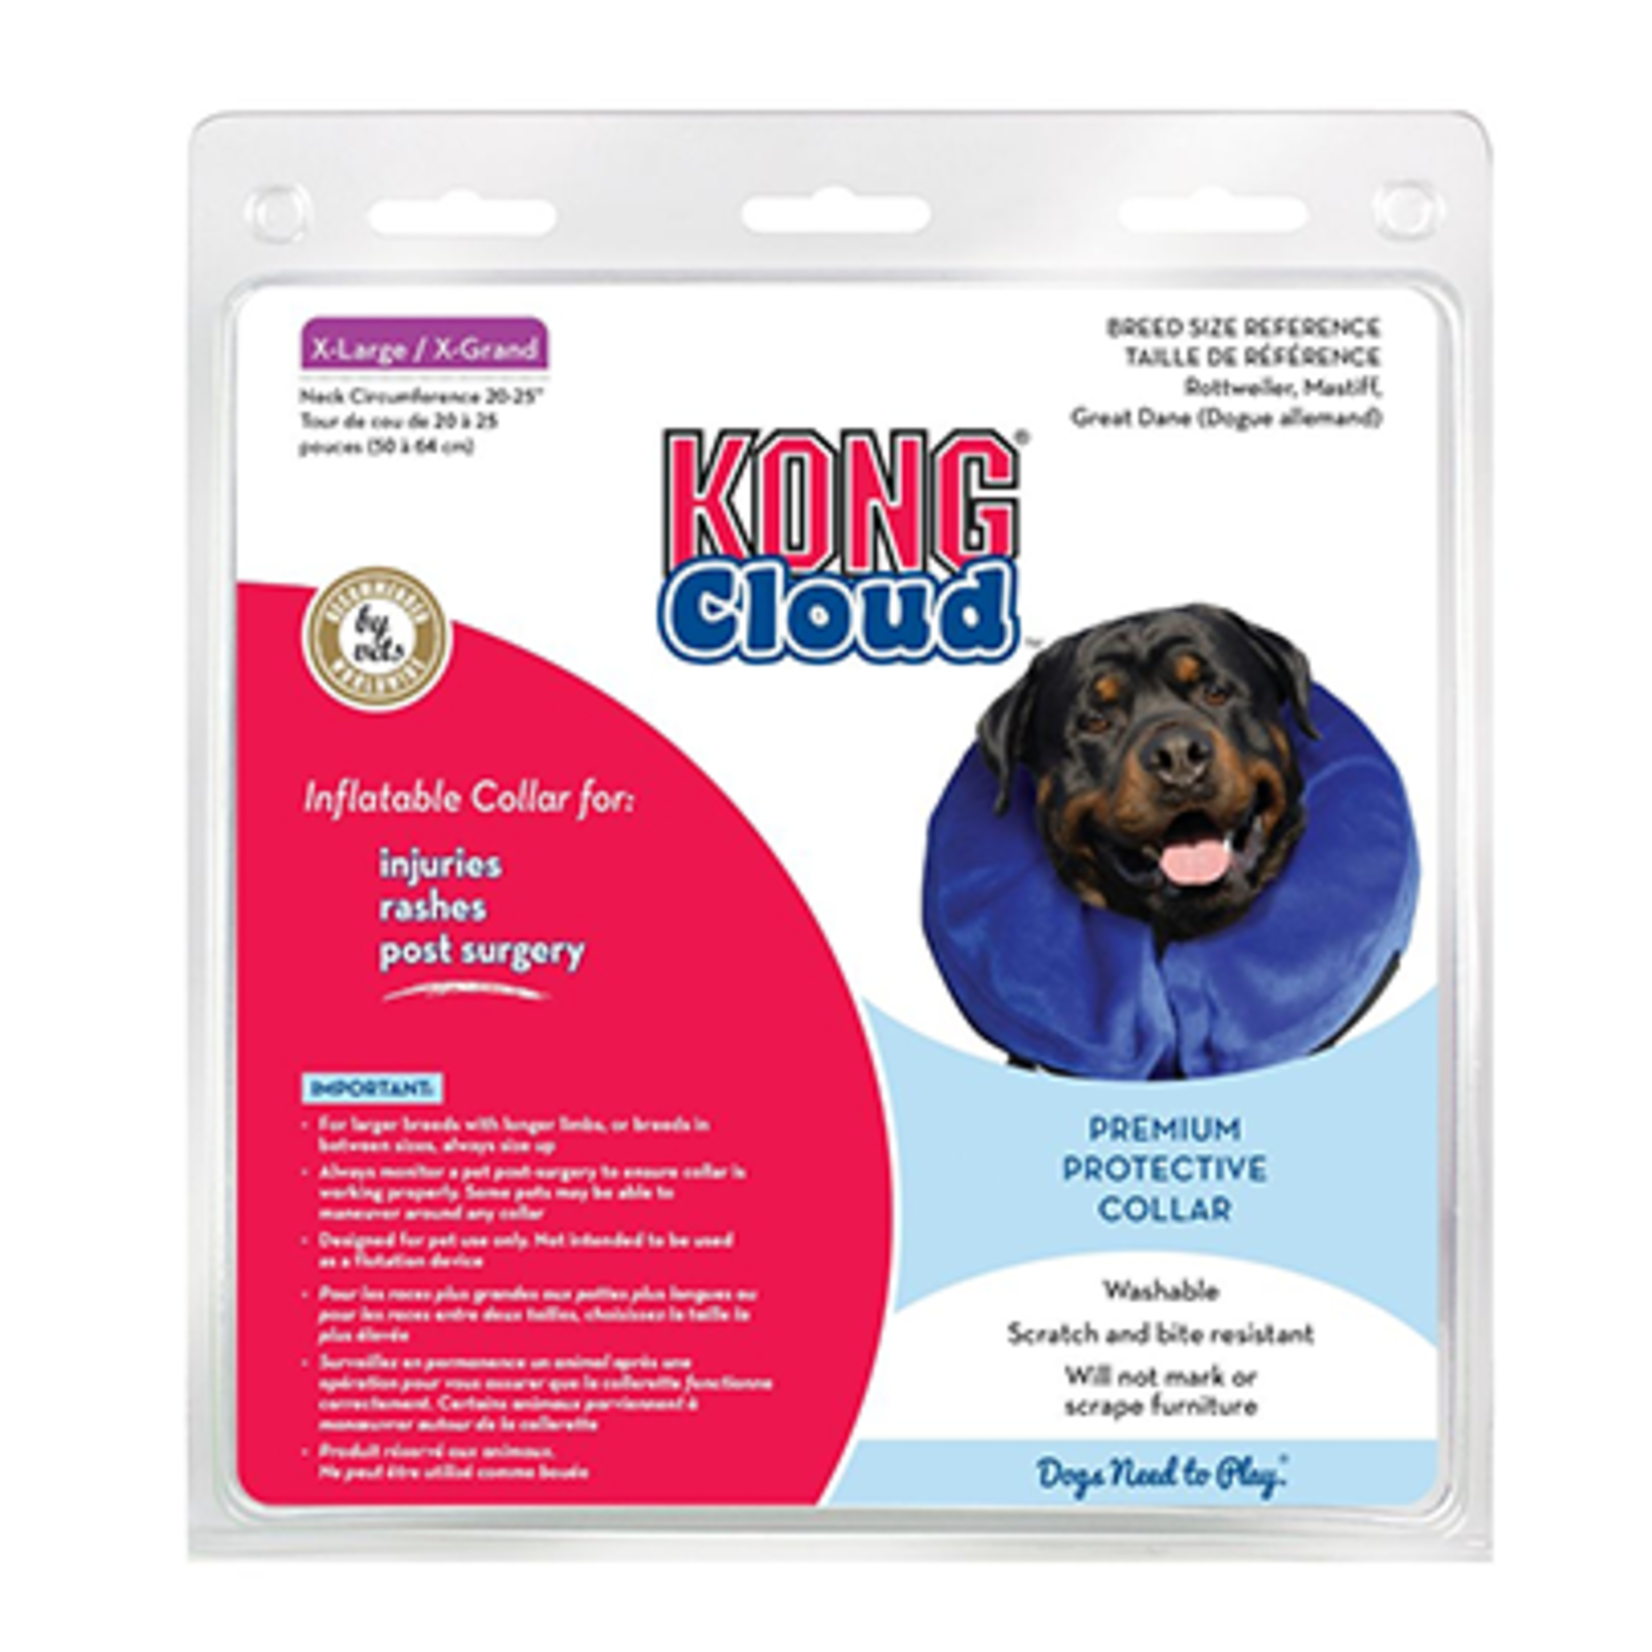 Kong Cloud Collar - For Dogs - XLARGE